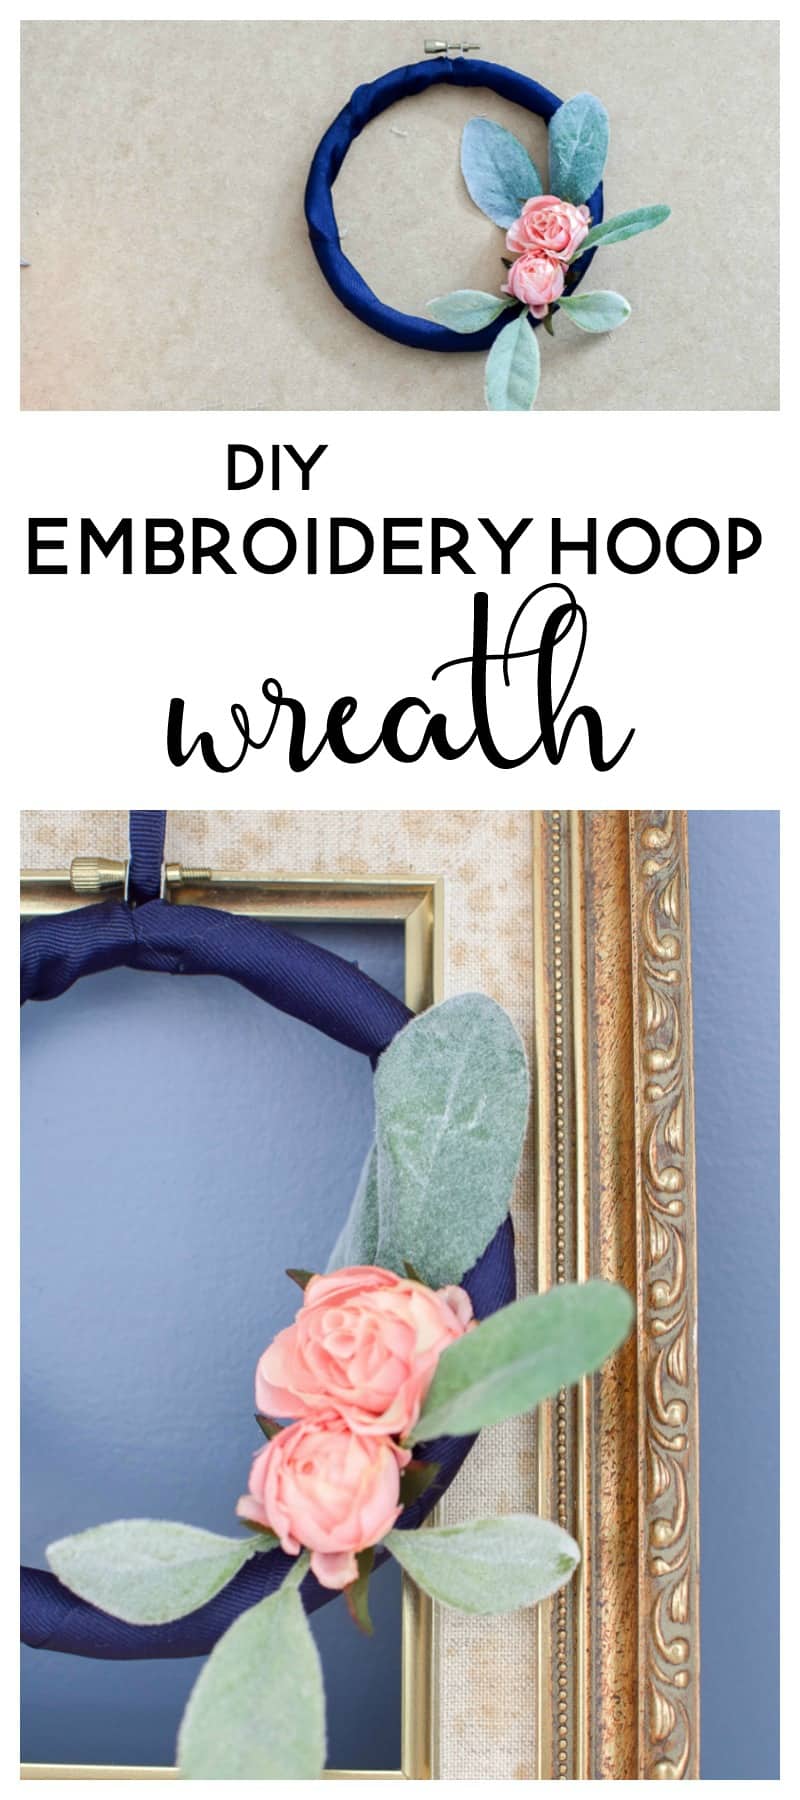 A collage of stacked images of a DIY embroidery hoop wreath, made with navy blue fabric and faux flowers. Image text overlay reads "DIY embroidery hoop wreath" in black text.